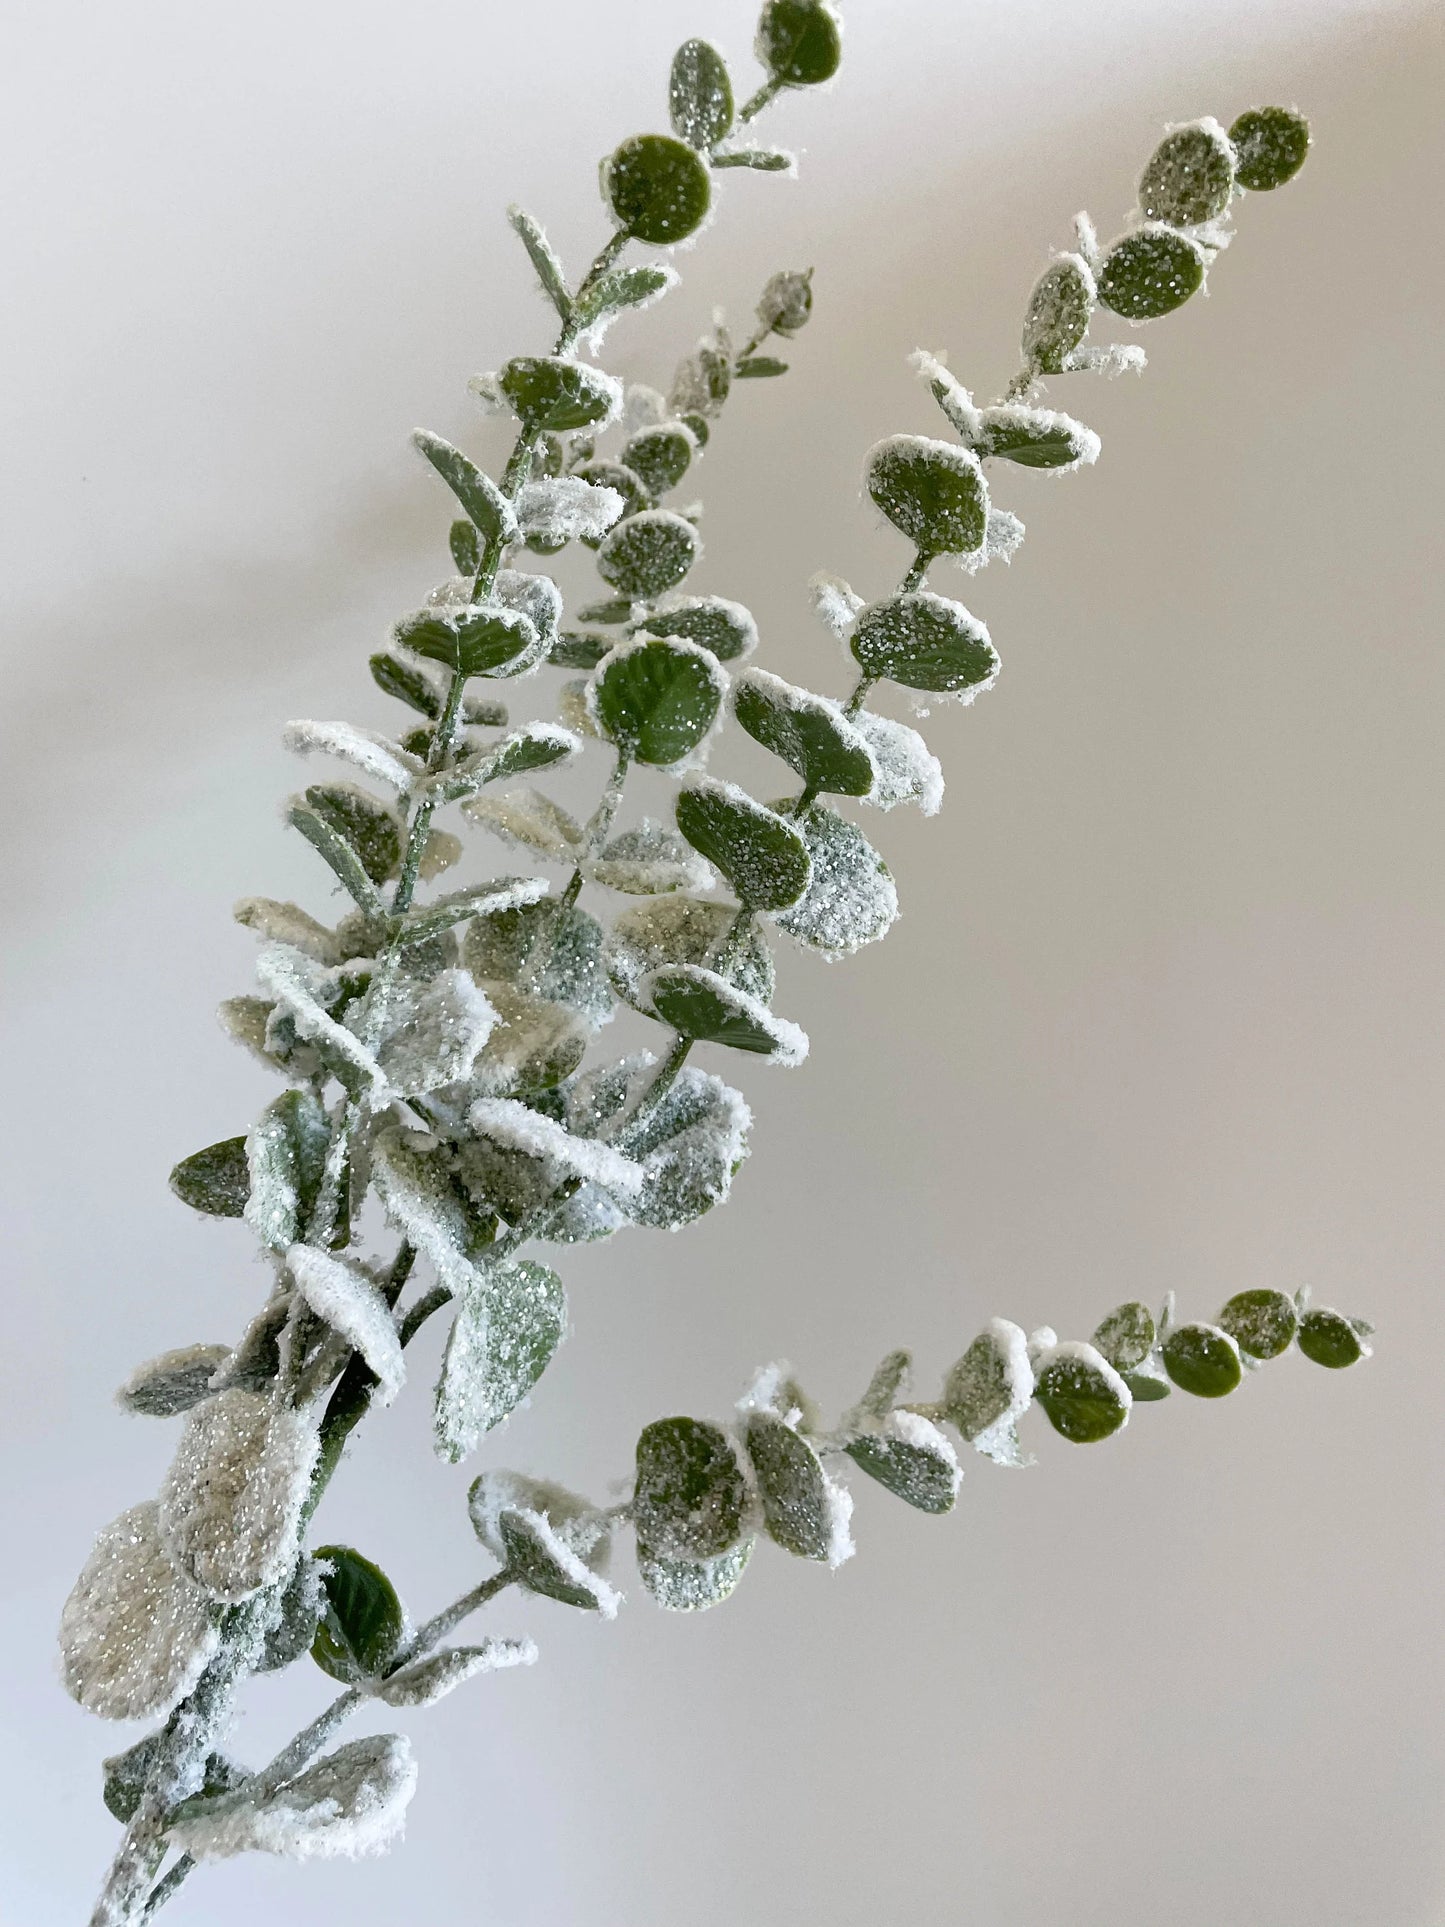 29" FROSTED SNOWED EUCALYPTUS LEAF SPRAY GREEN/WHITE